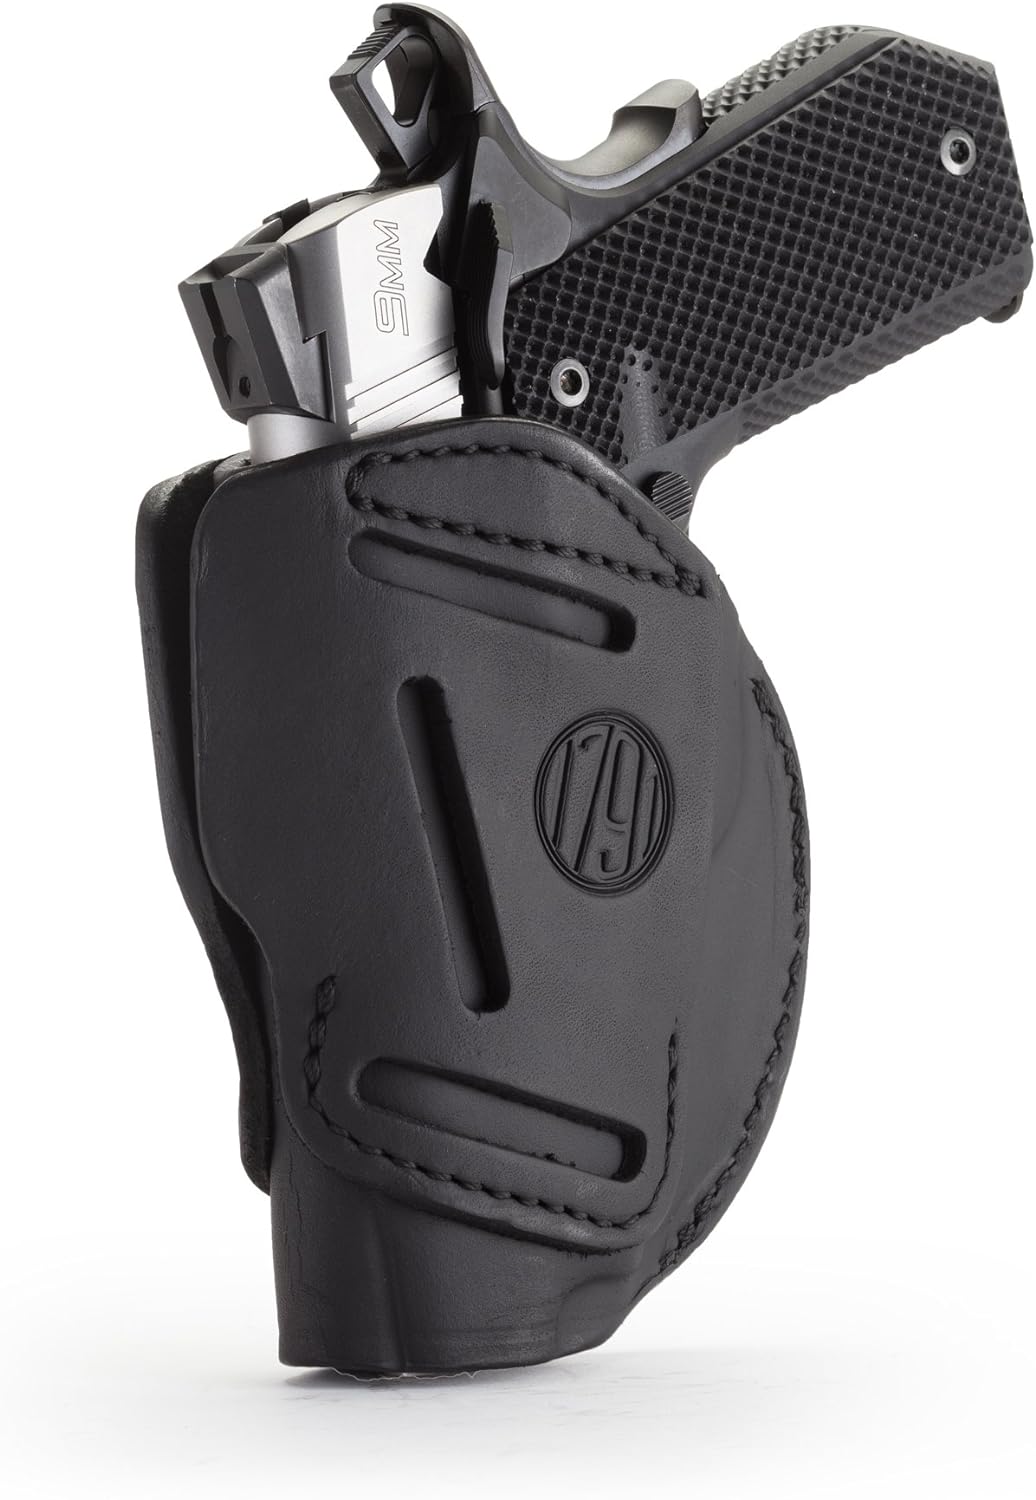 1791, GunLeather 3-Way 1911 Holster - Ambidextrous OWB CCW Holster - Right or Left Handed Leather Gun Holster - Fits All 1911 Models Sig, Colt, Kimber, Ruger, Browning, Taurus and Remmington